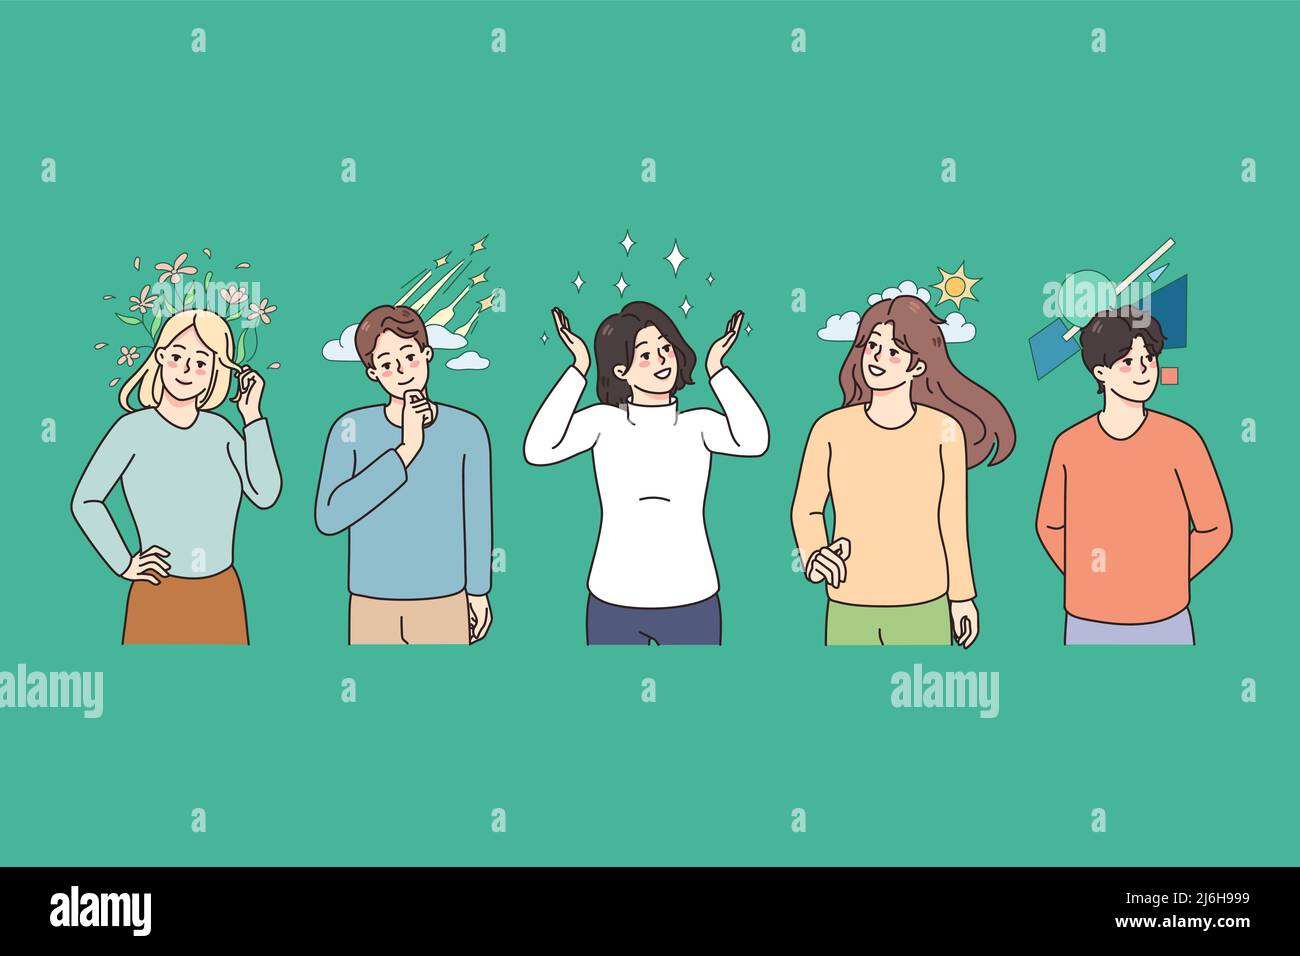 Diverse people with different thoughts and feelings in head. Men and women thinking, imagining and planning. Emotion and expressions in mind. Visualization. Vector illustration.  Stock Vector